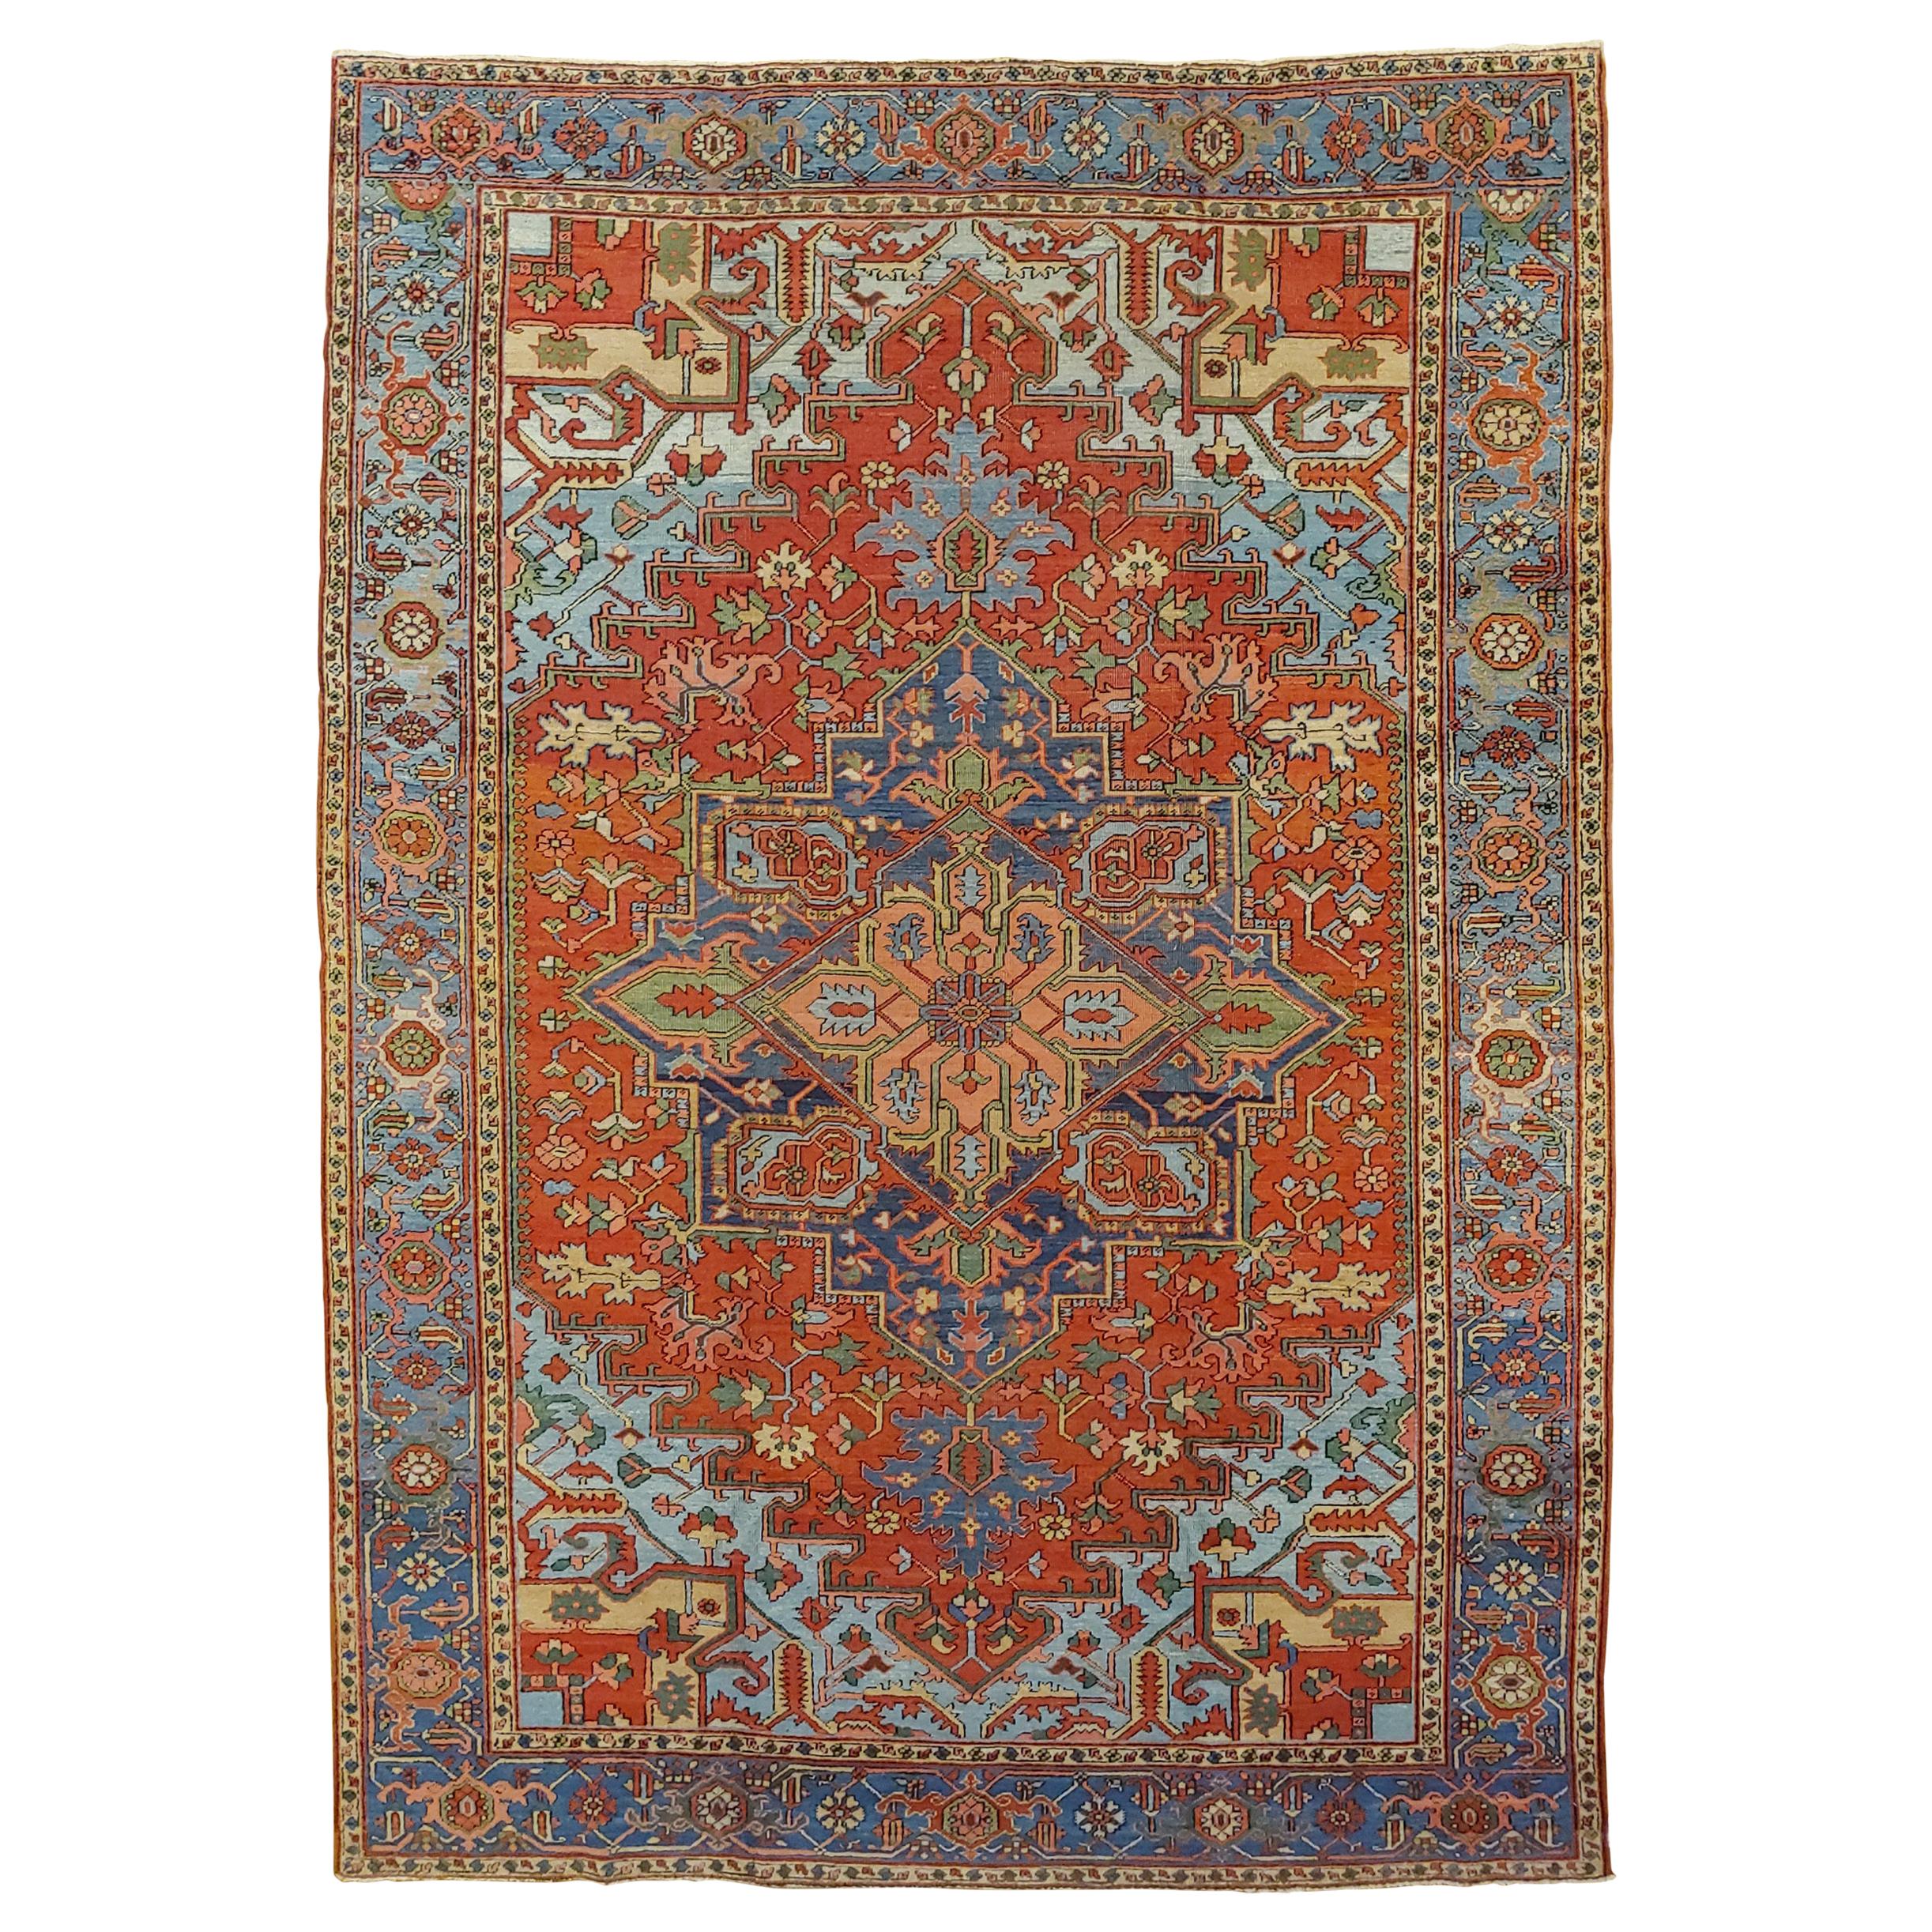 Antique Persian Heriz Rug, Rust Colored with Light Blue Wool, Room Size